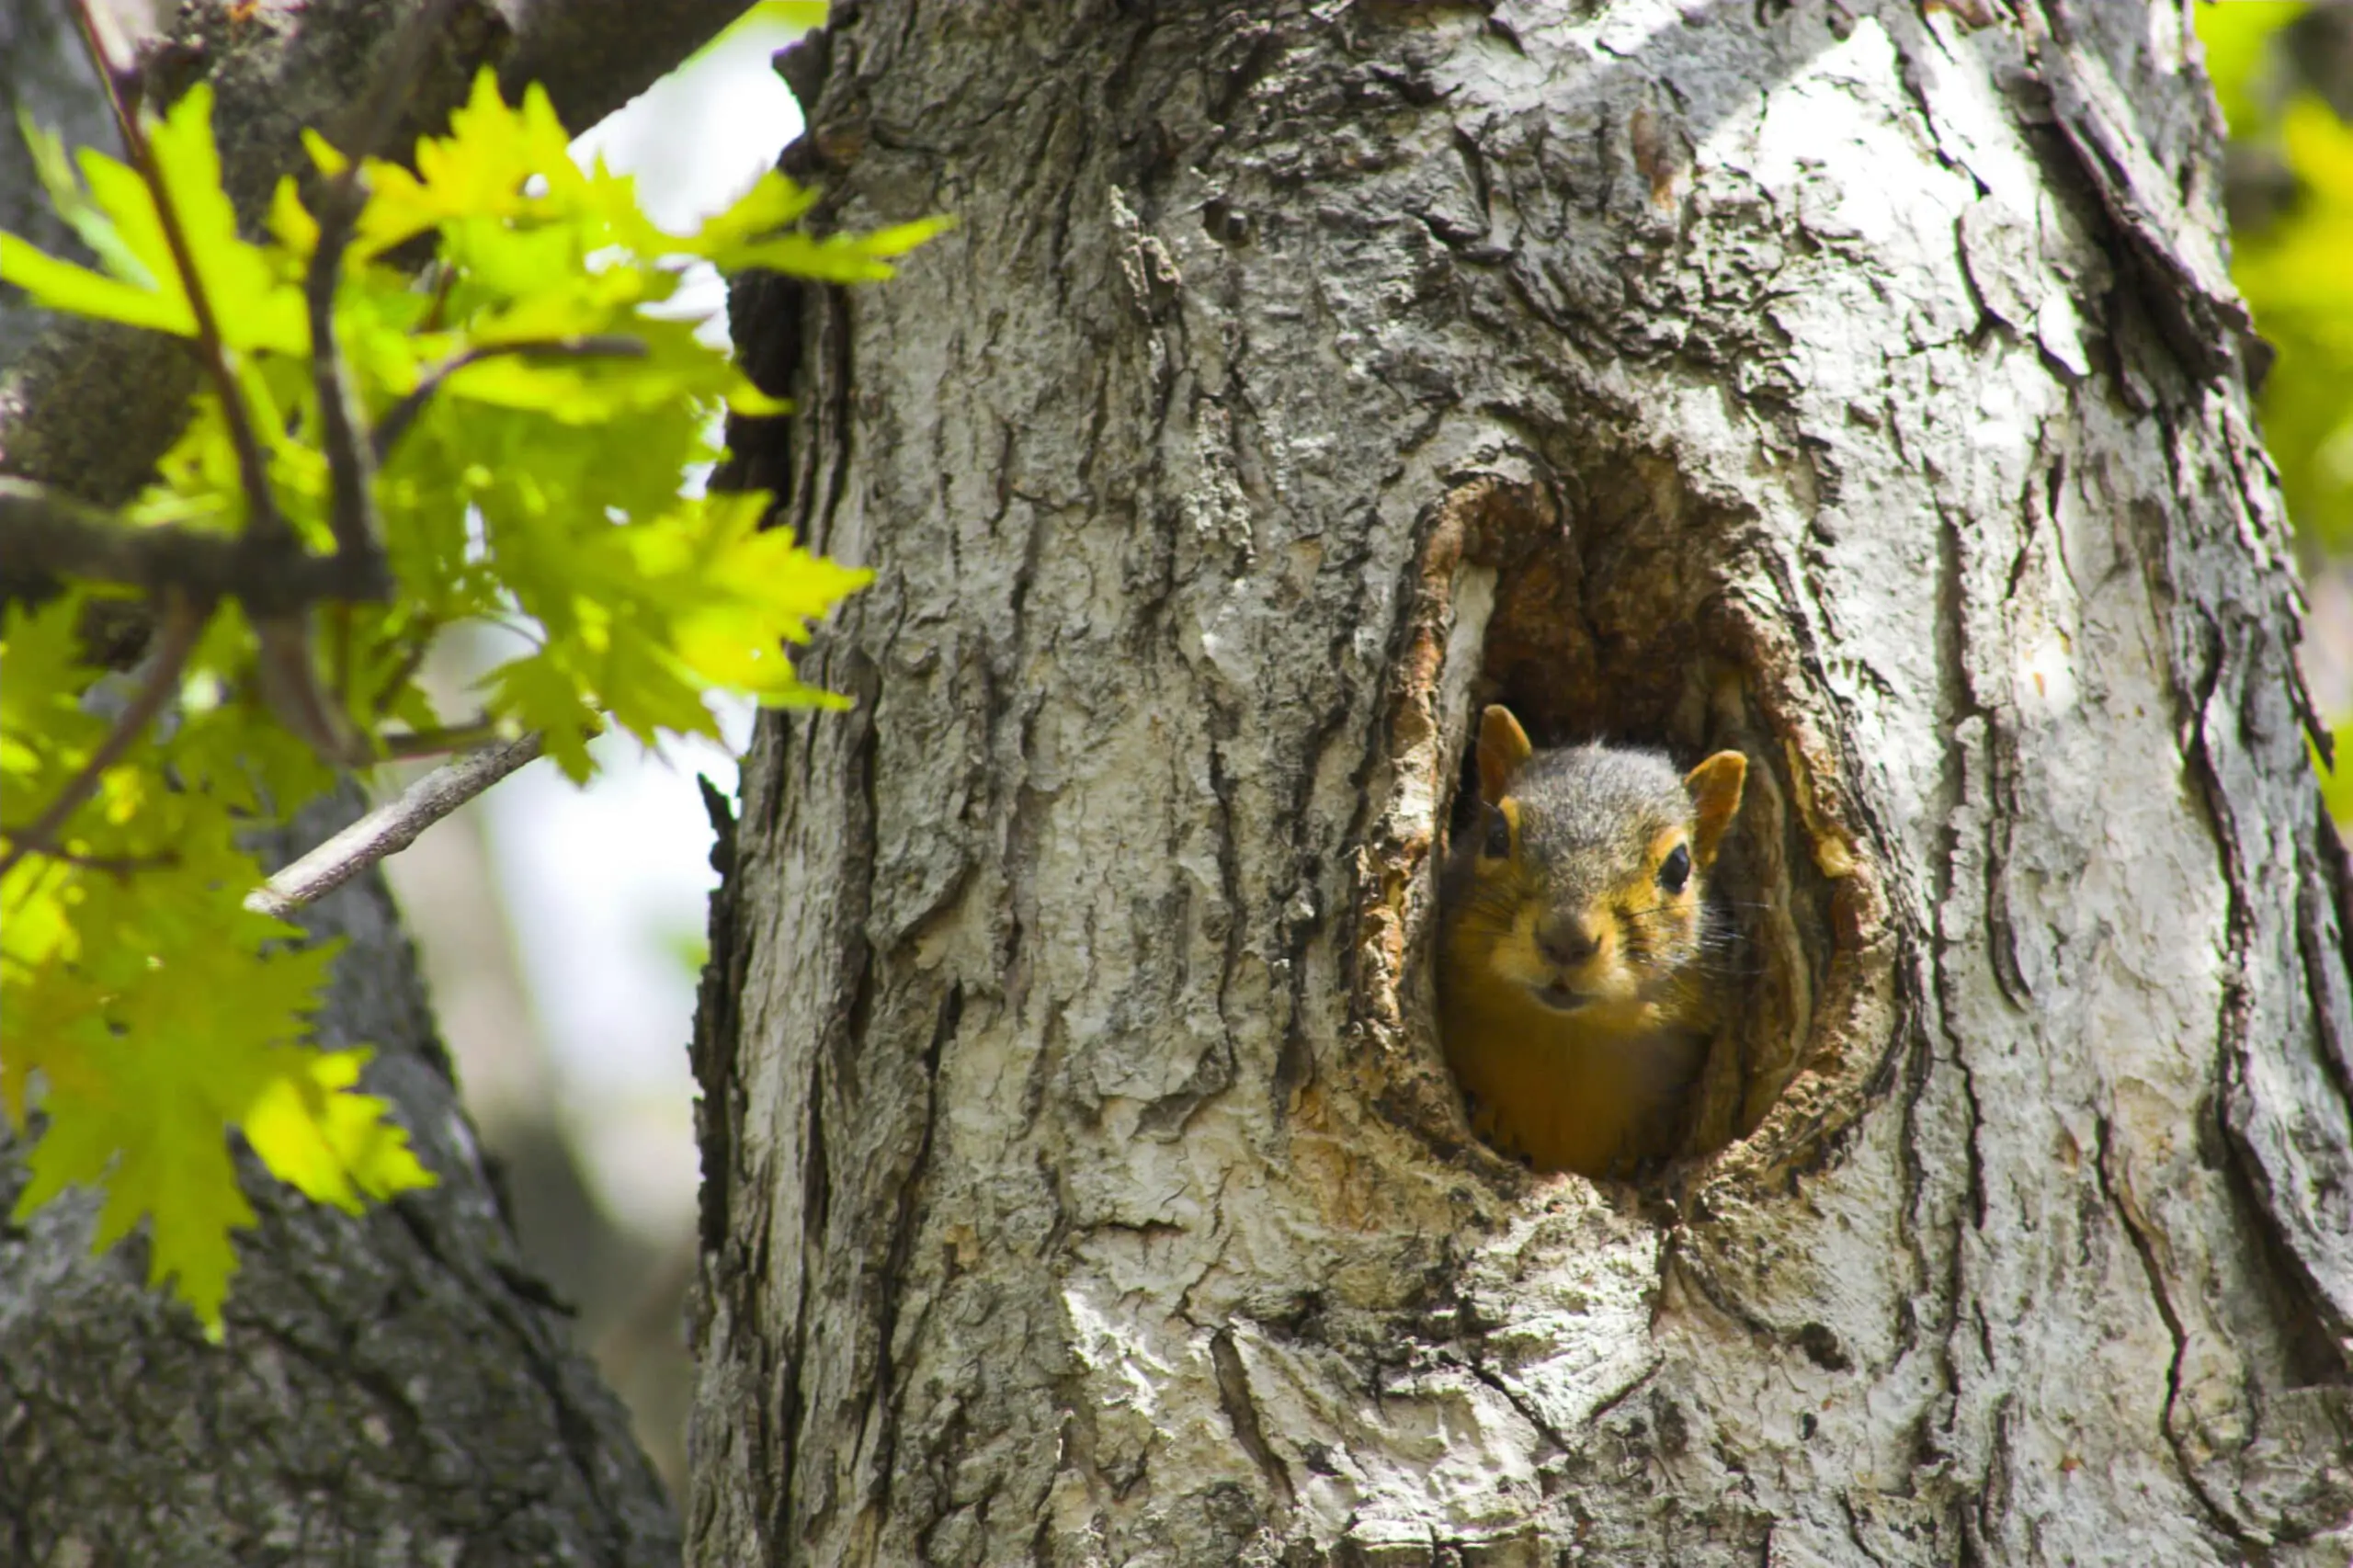 Squirrel sitting in its nest, the hole in the tree.